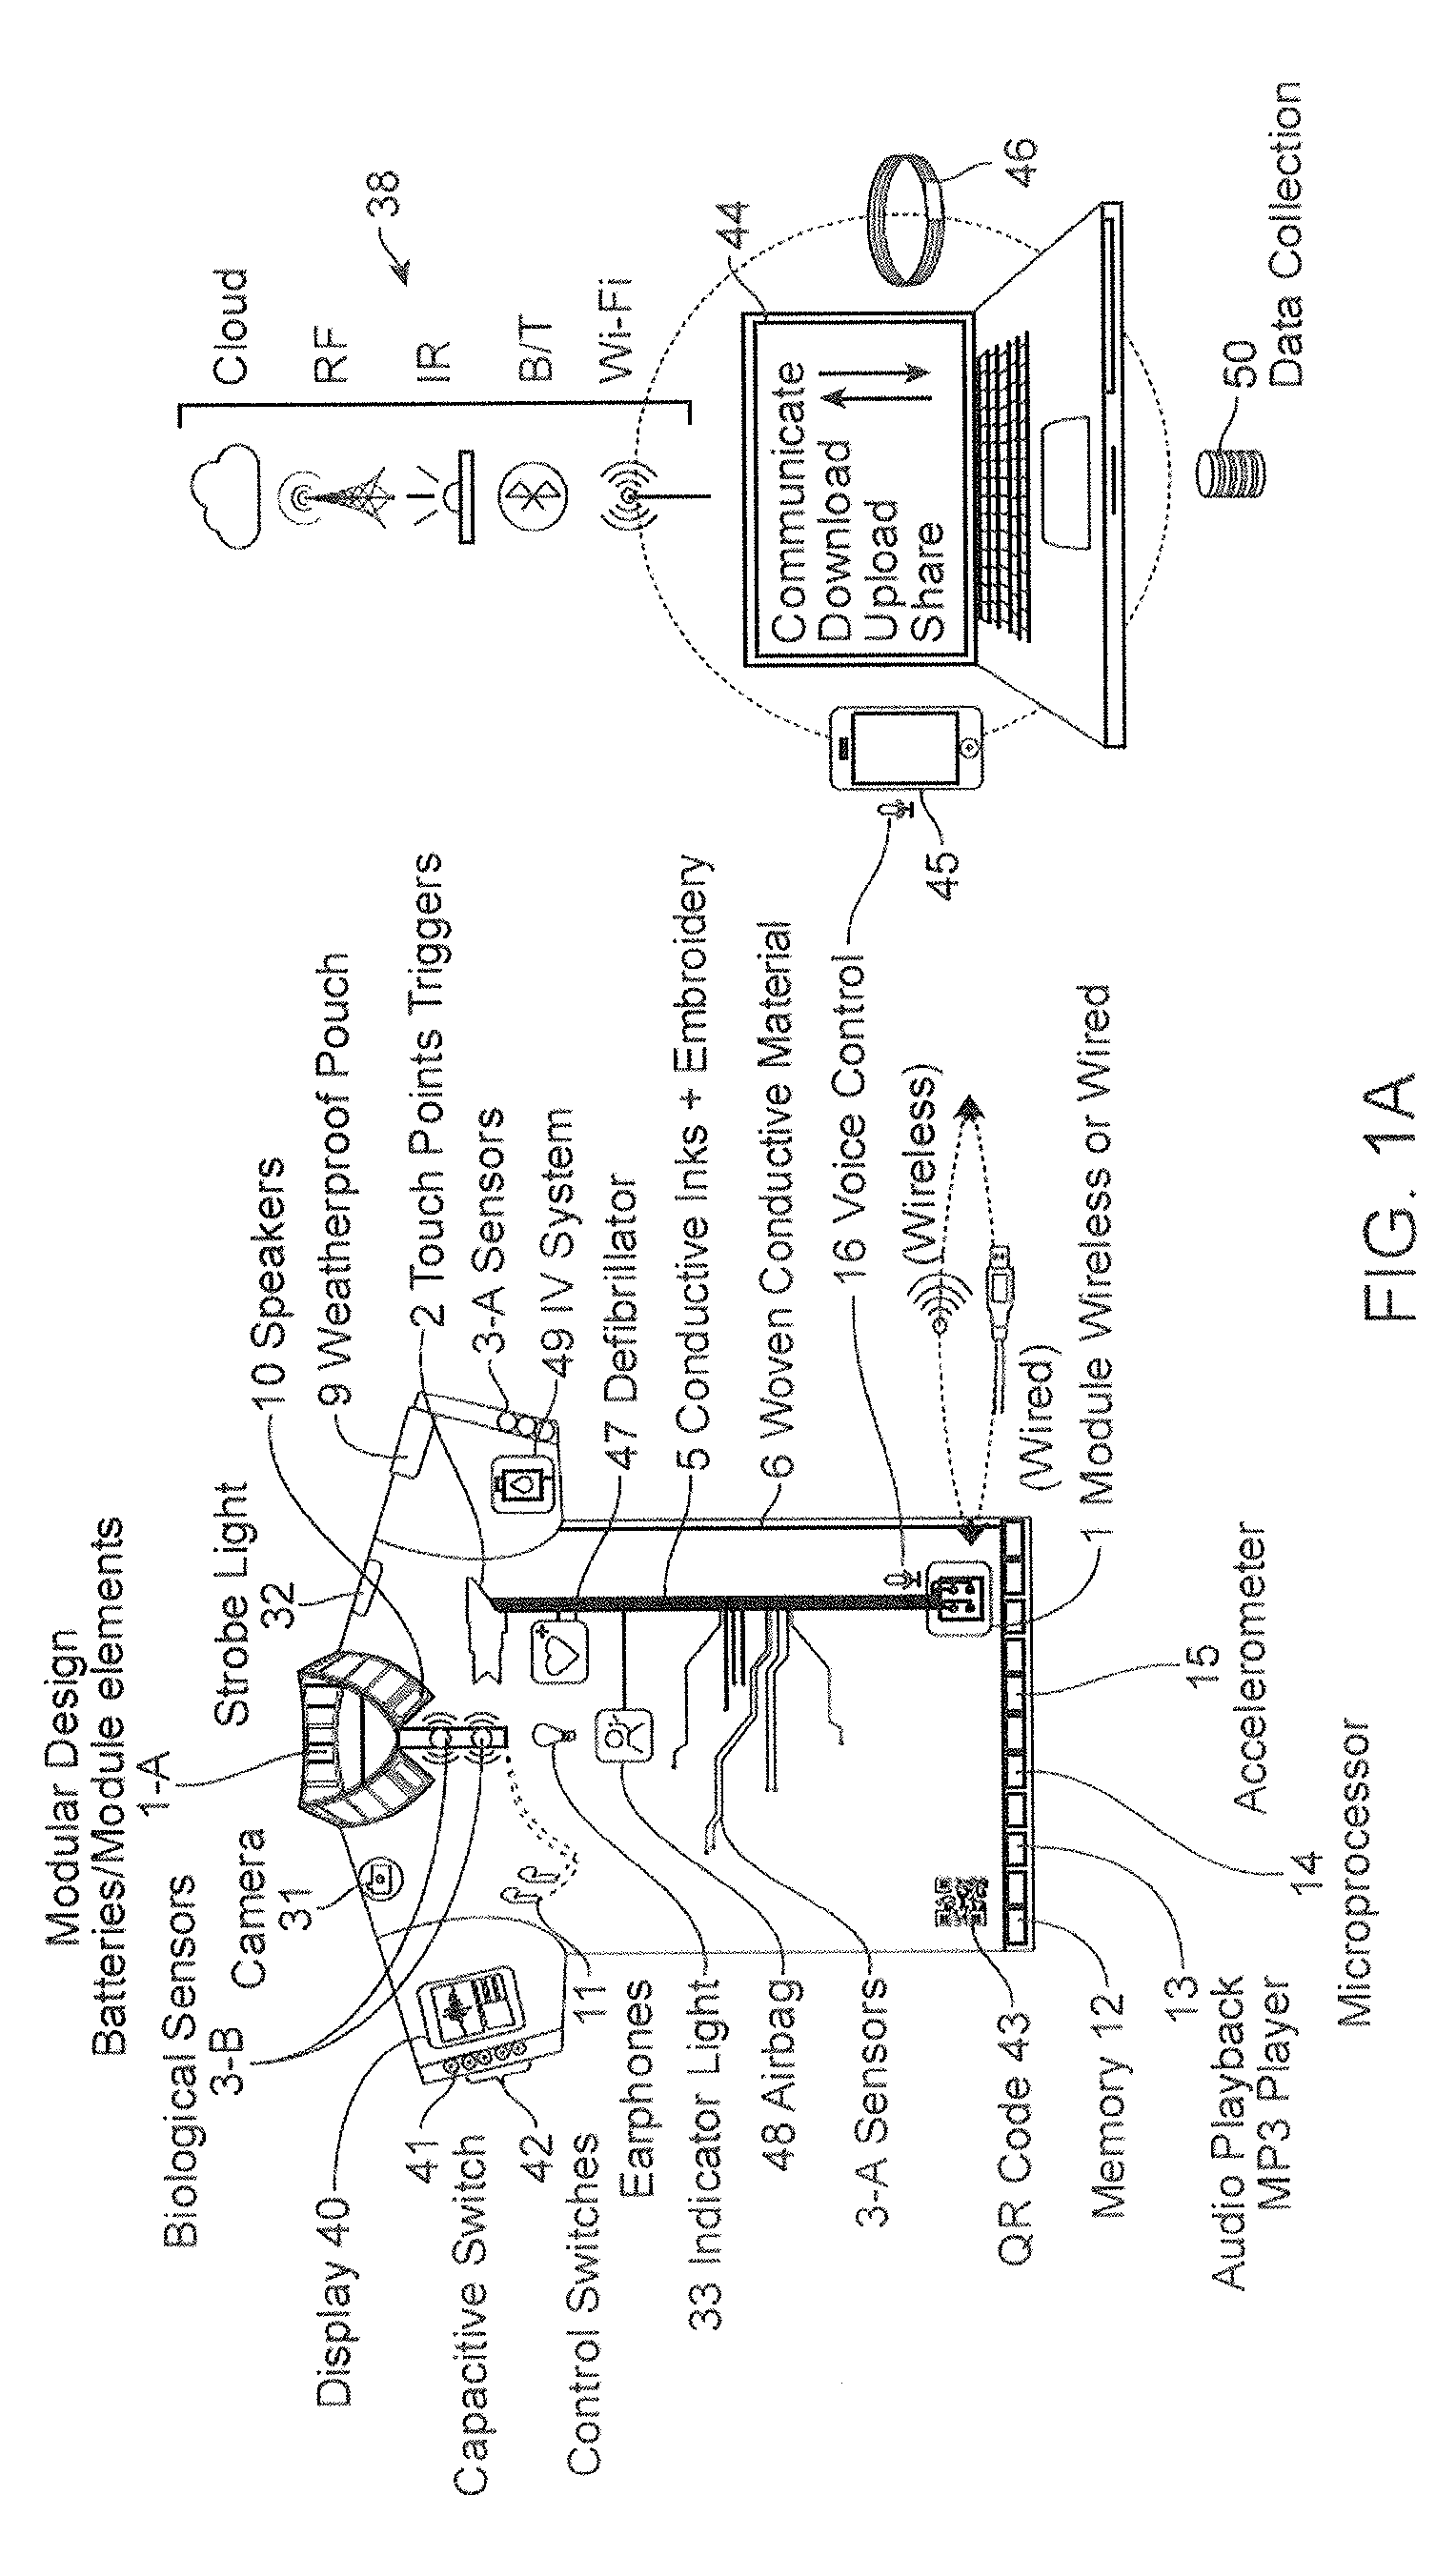 Methods of making garments having stretchable and conductive ink